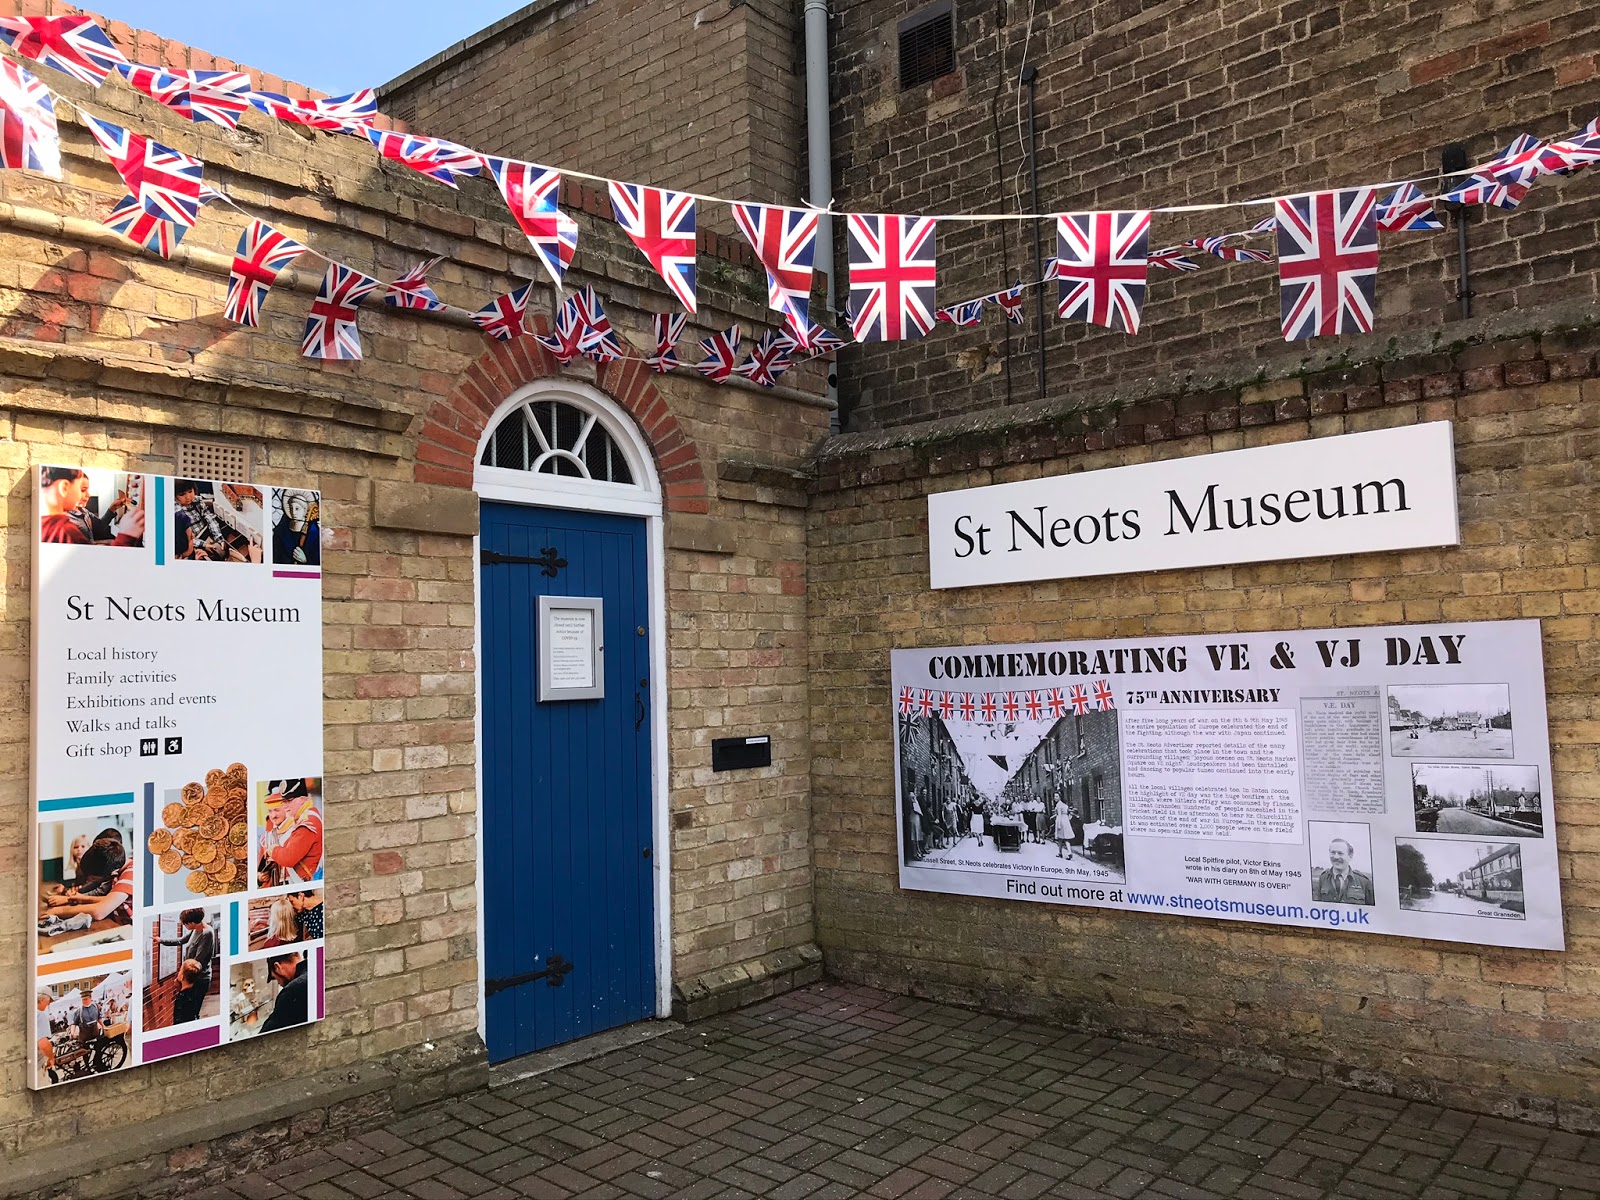 https://whatremovals.co.uk/wp-content/uploads/2022/02/St Neots Museum-300x225.jpeg